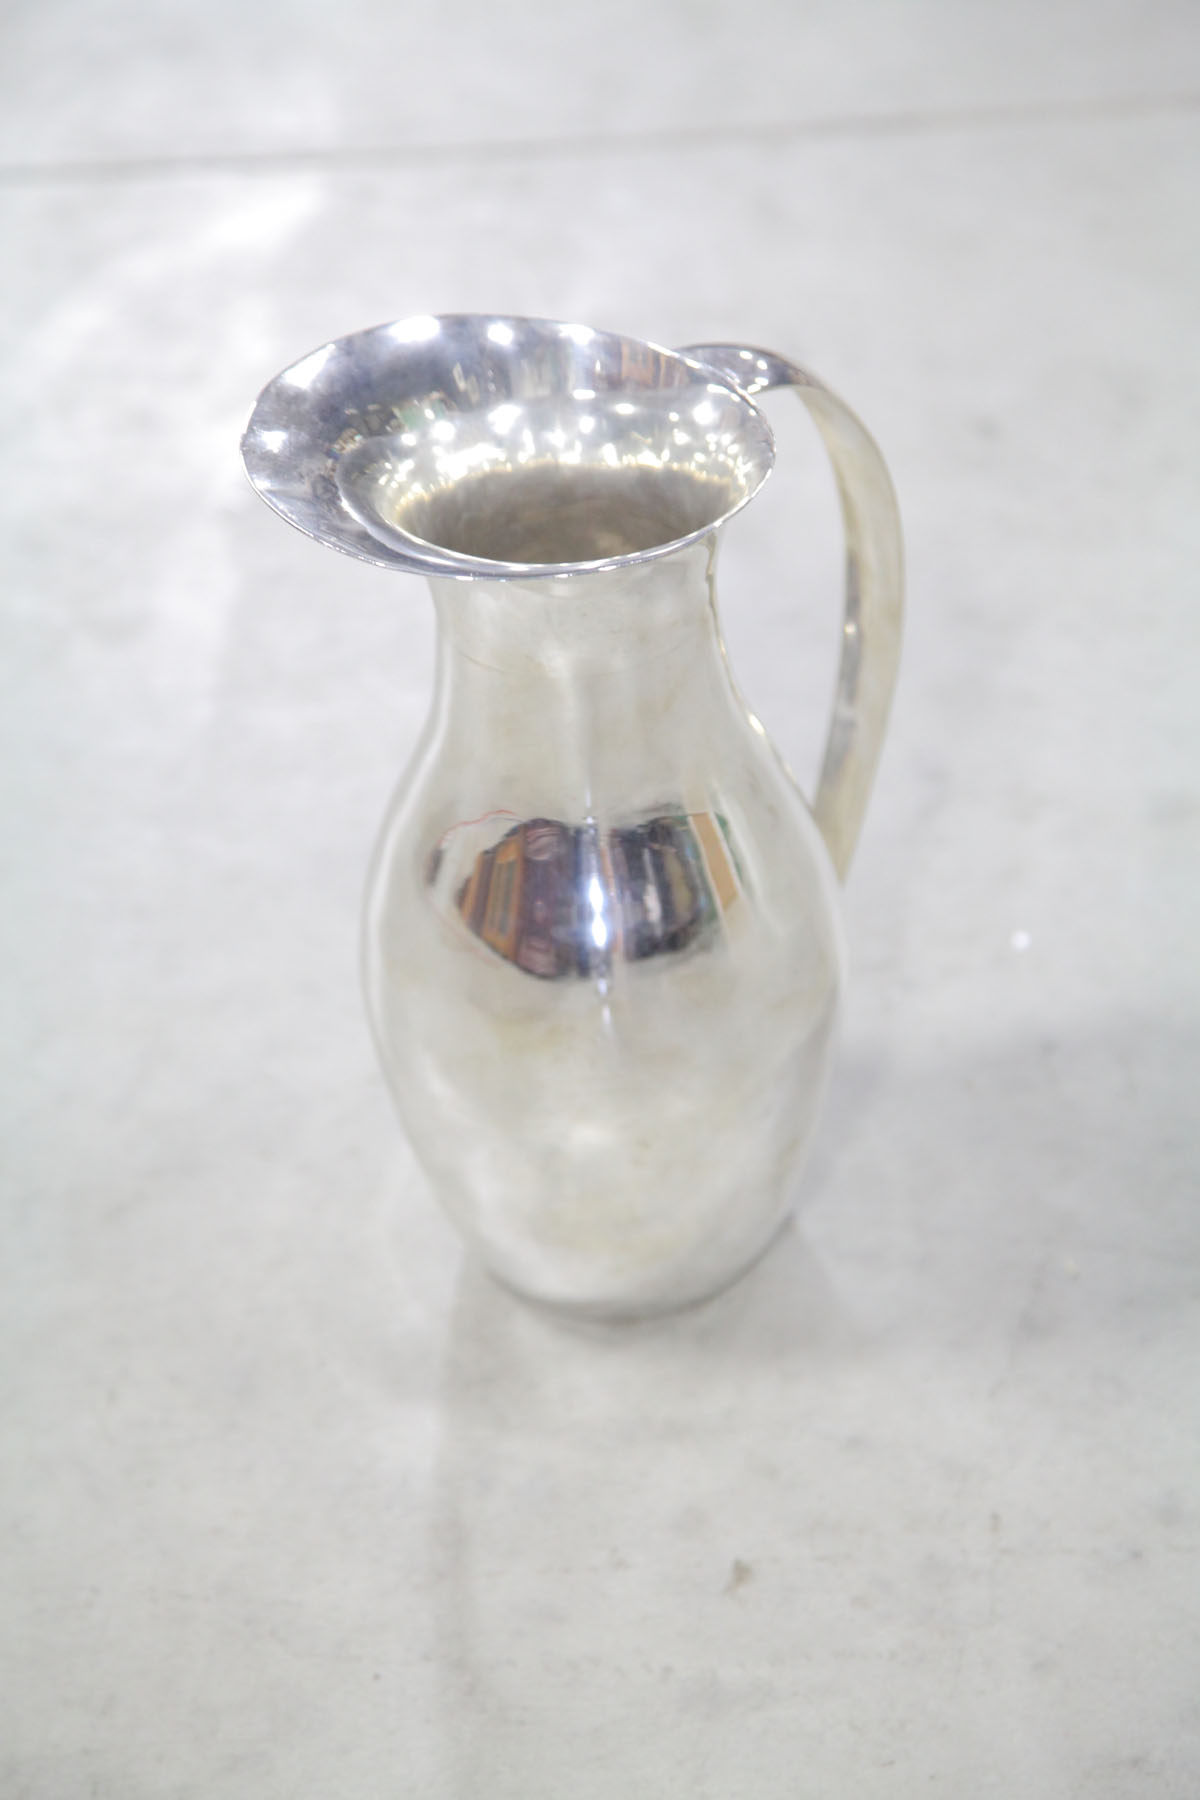 STERLING SILVER PITCHER.  Mexico  20th